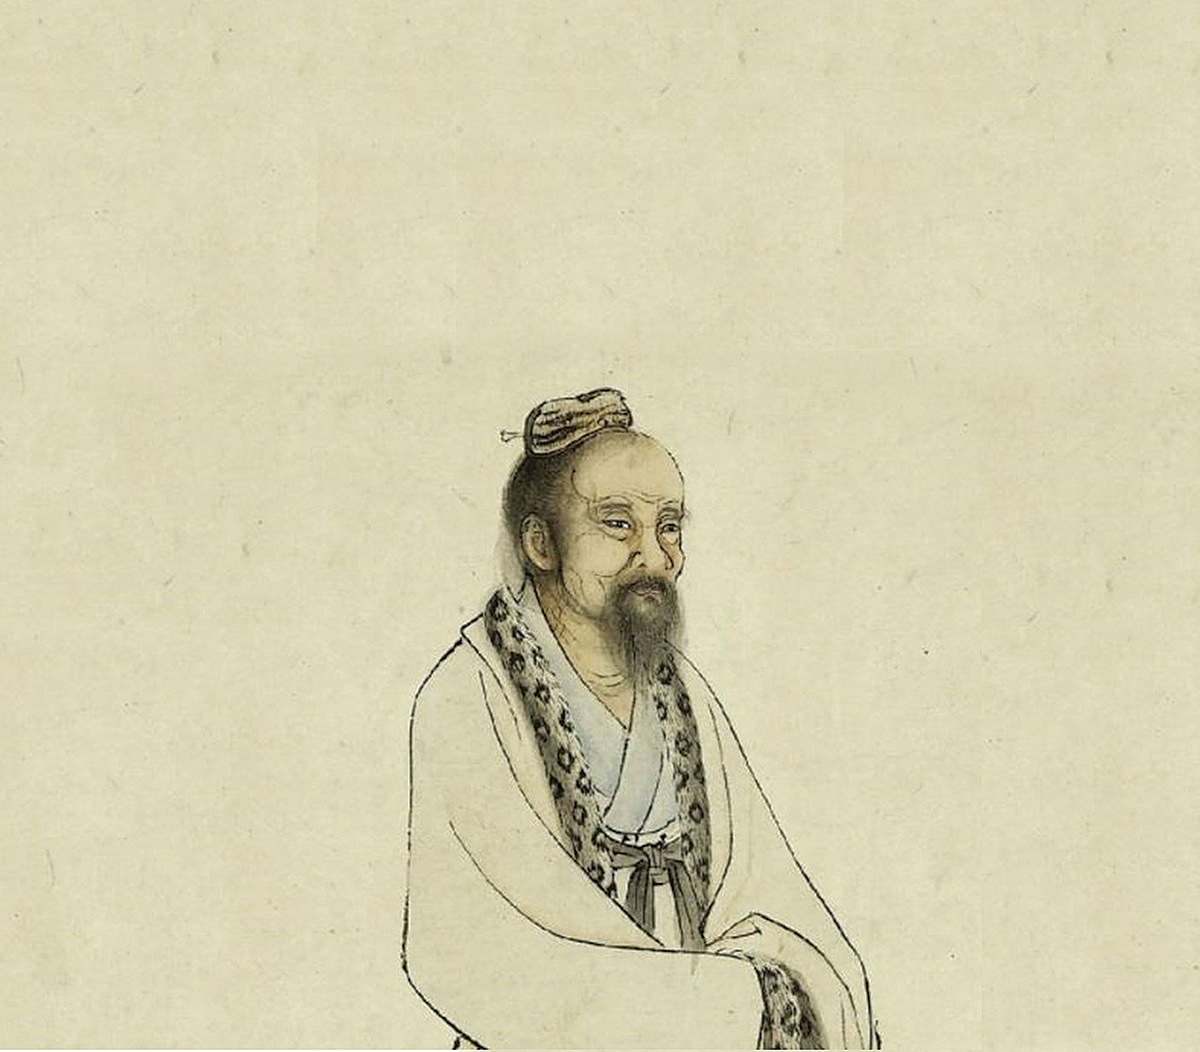 Zhuang Zhou: The Chinese Philosopher Who Explained Spontaneous Order 2,000 Years Before Adam Smith